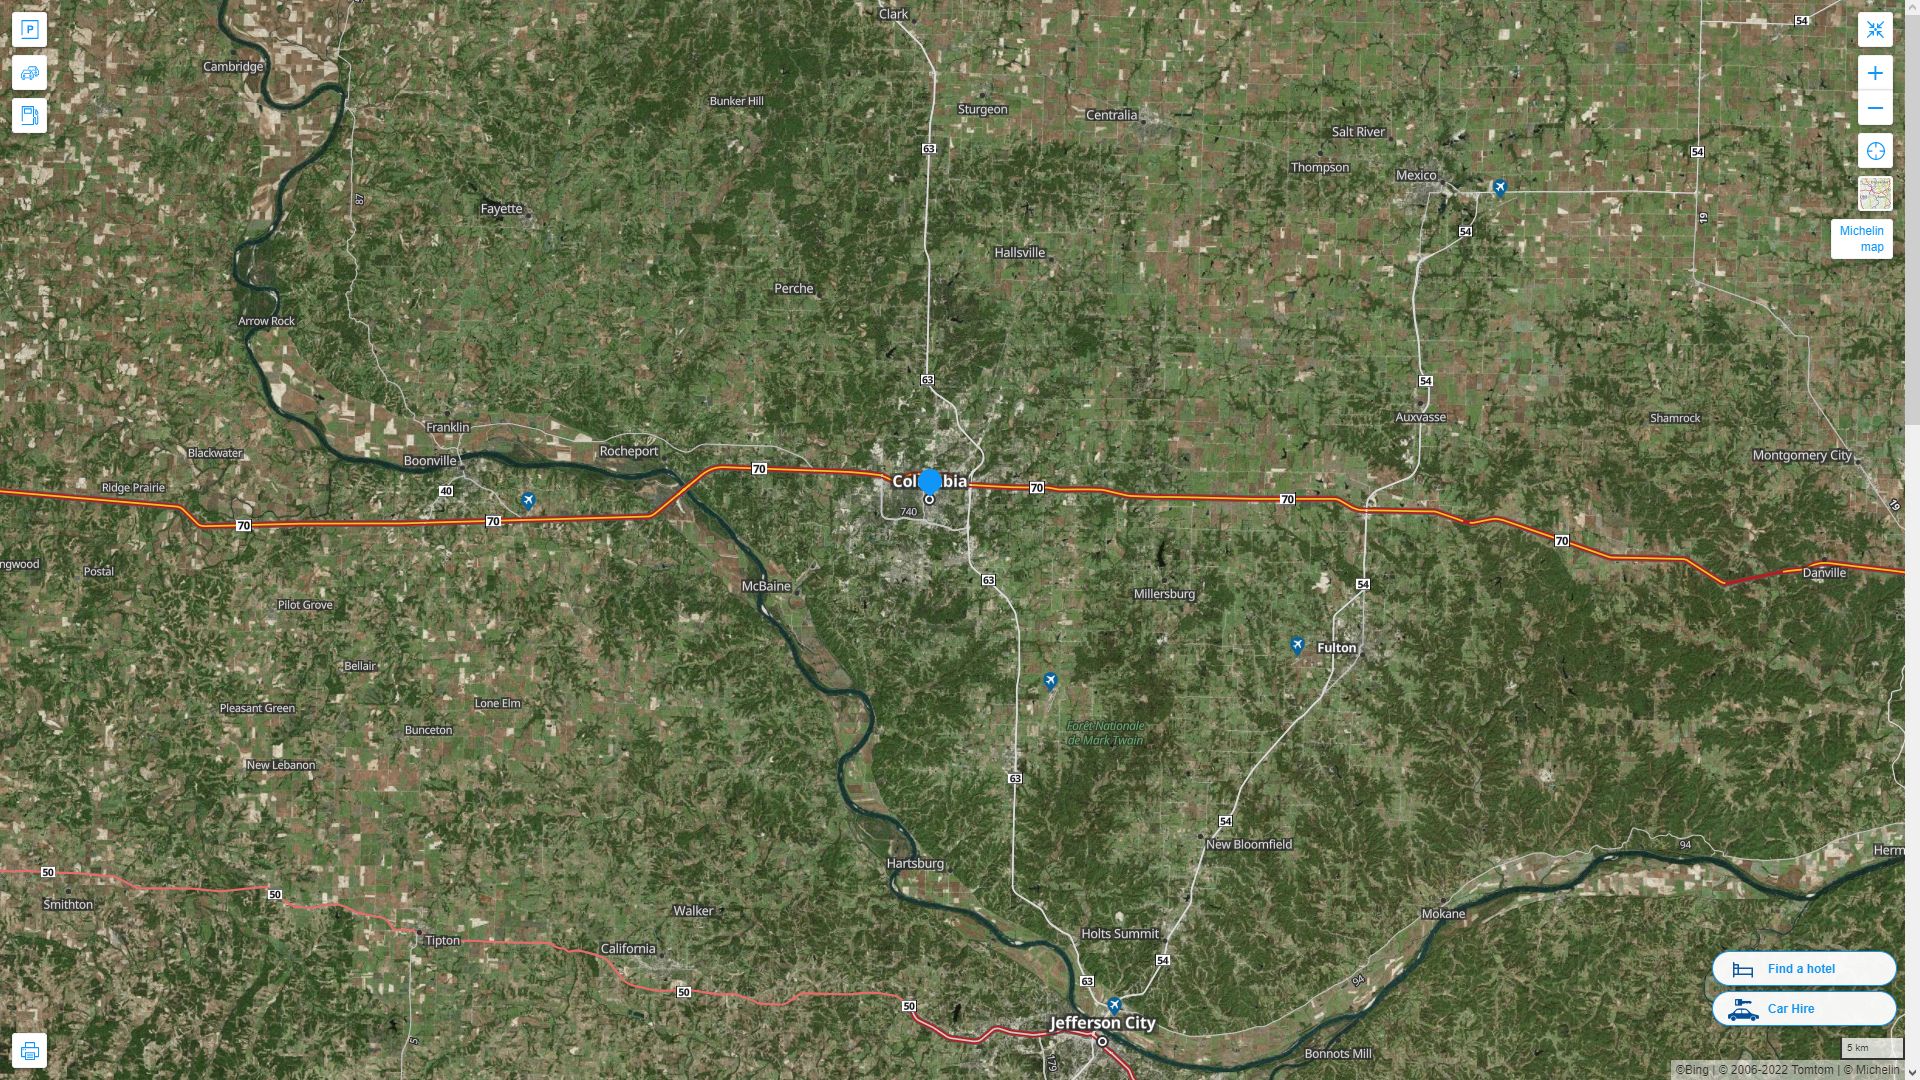 Columbia Missouri Highway and Road Map with Satellite View